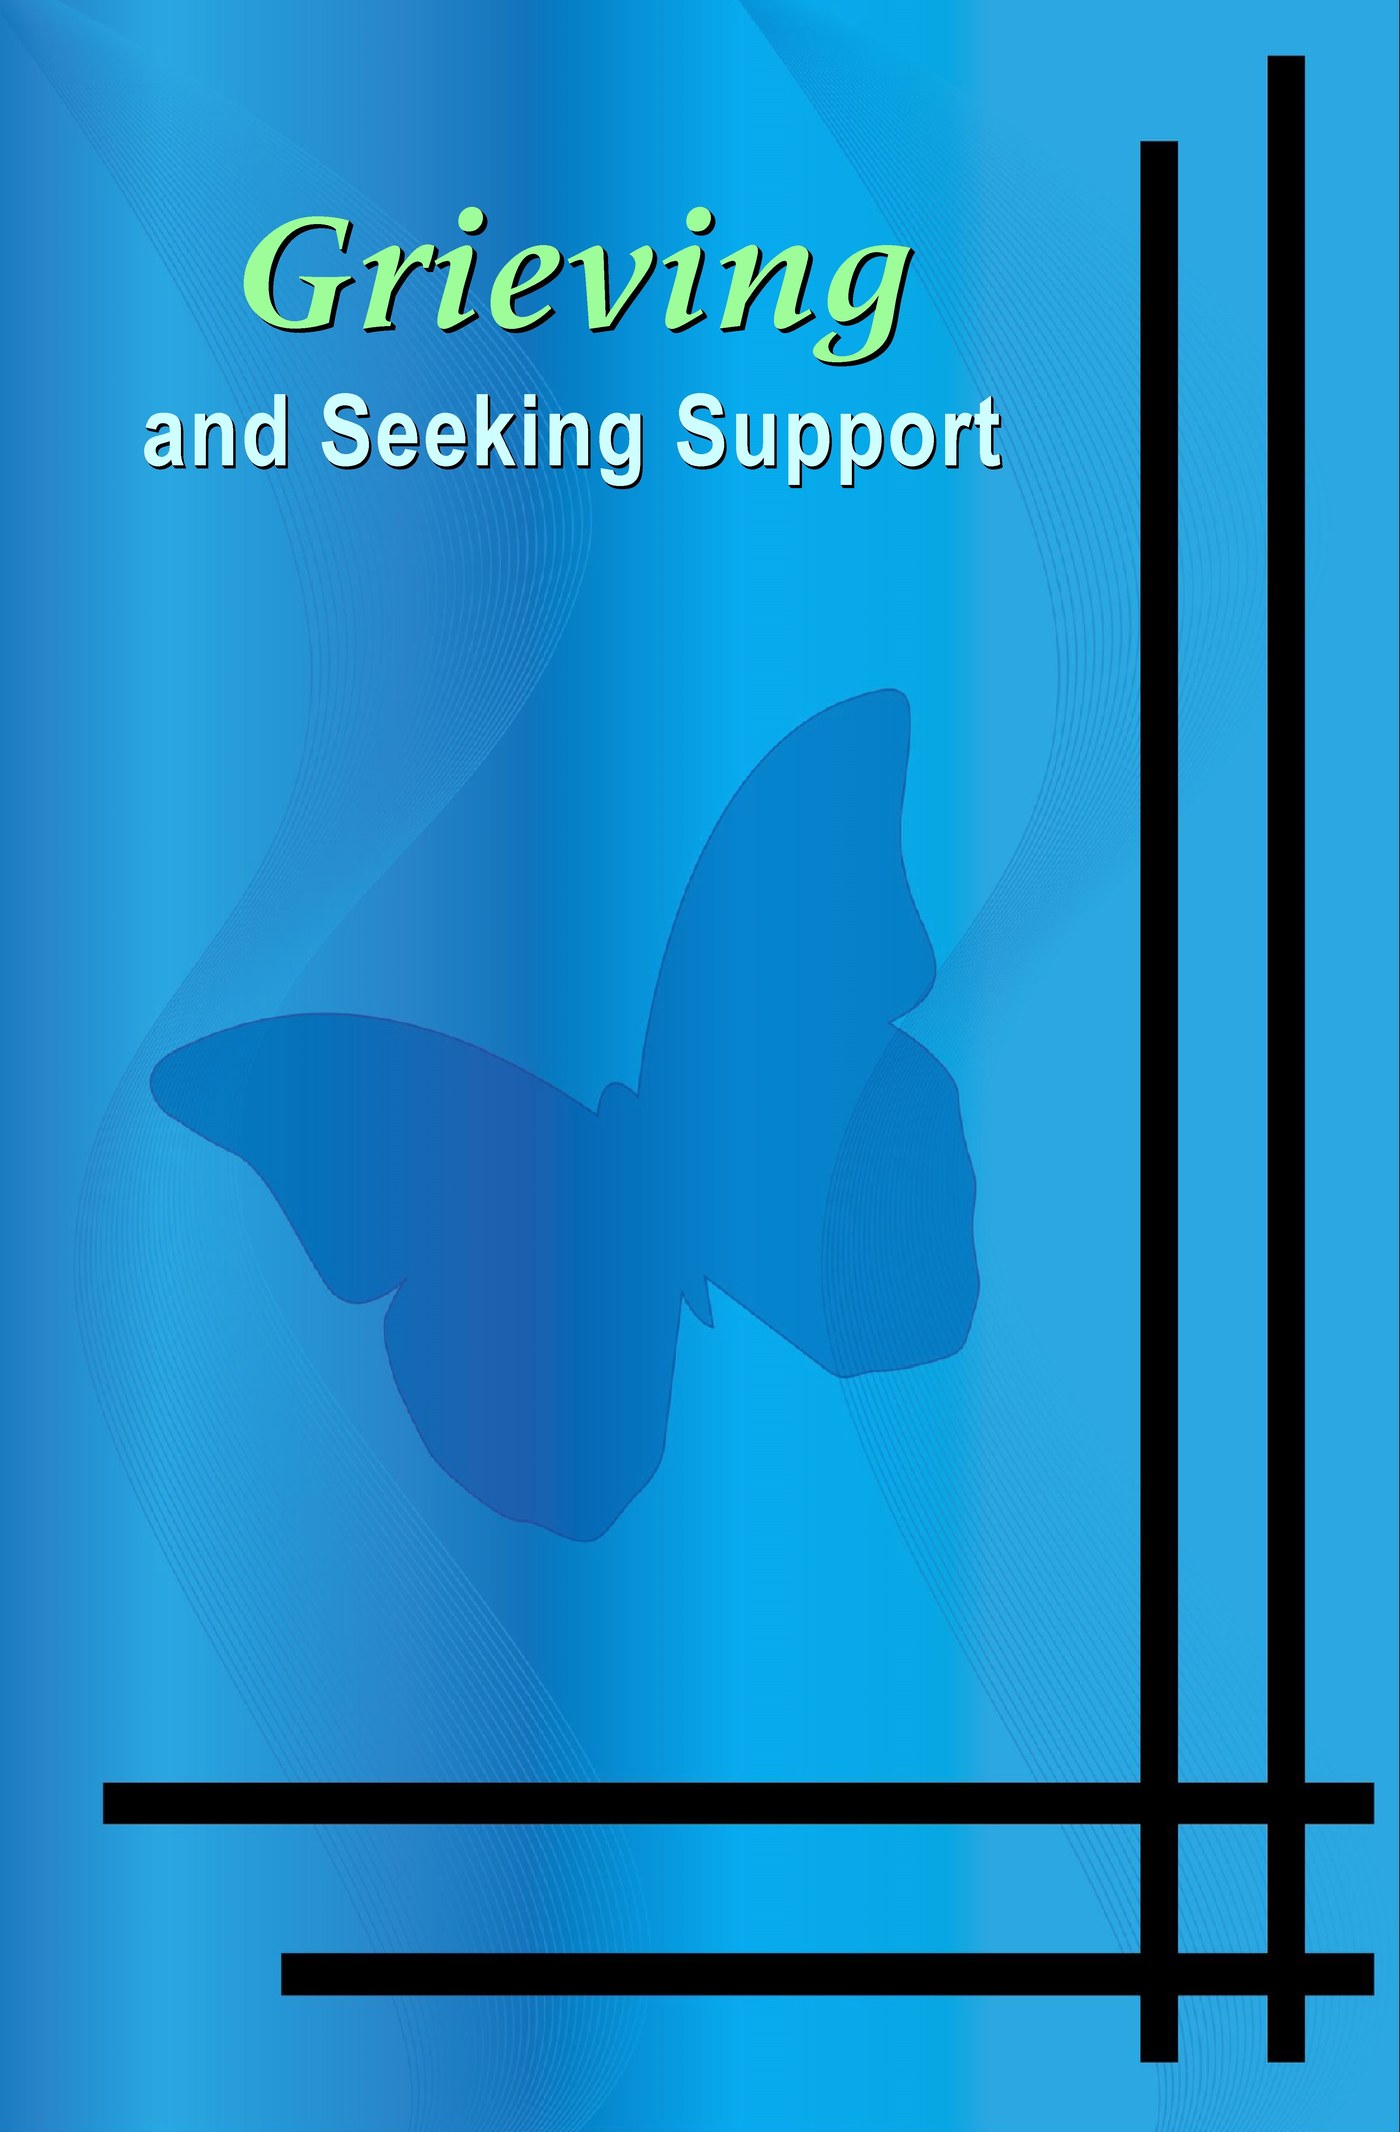 L7064 - Grieving and Seeking Support